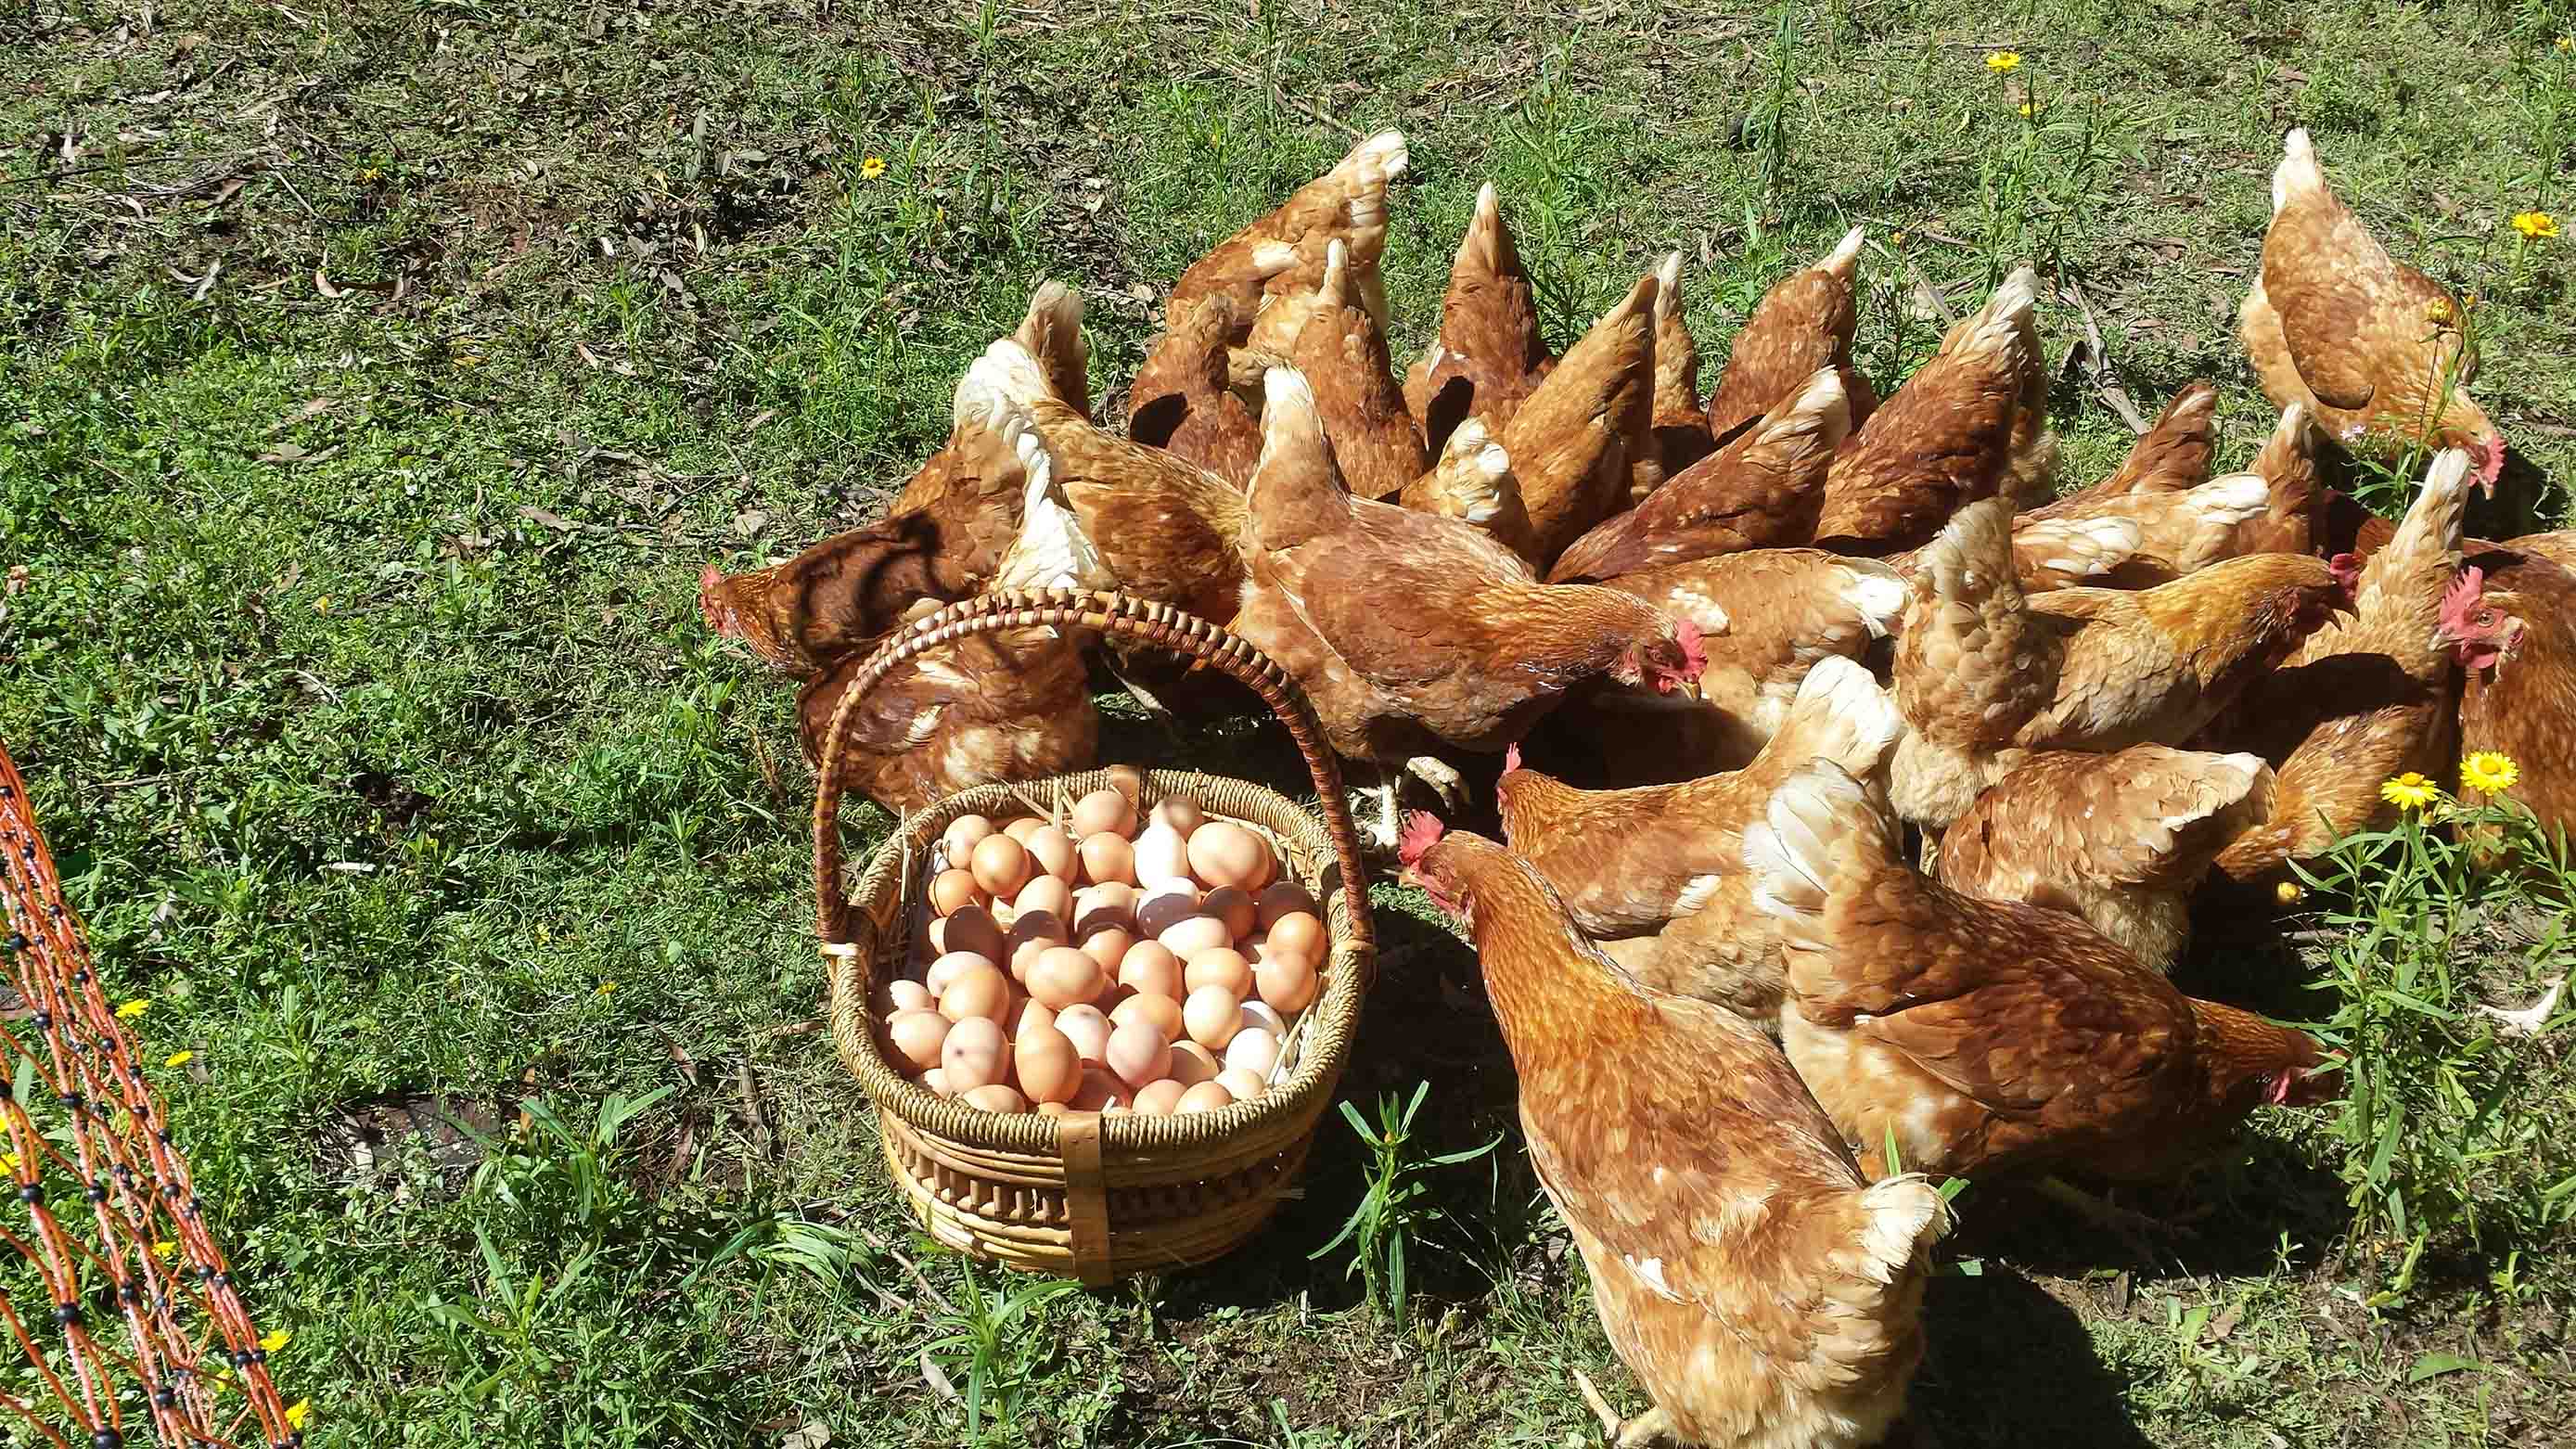 Chickens with eggs